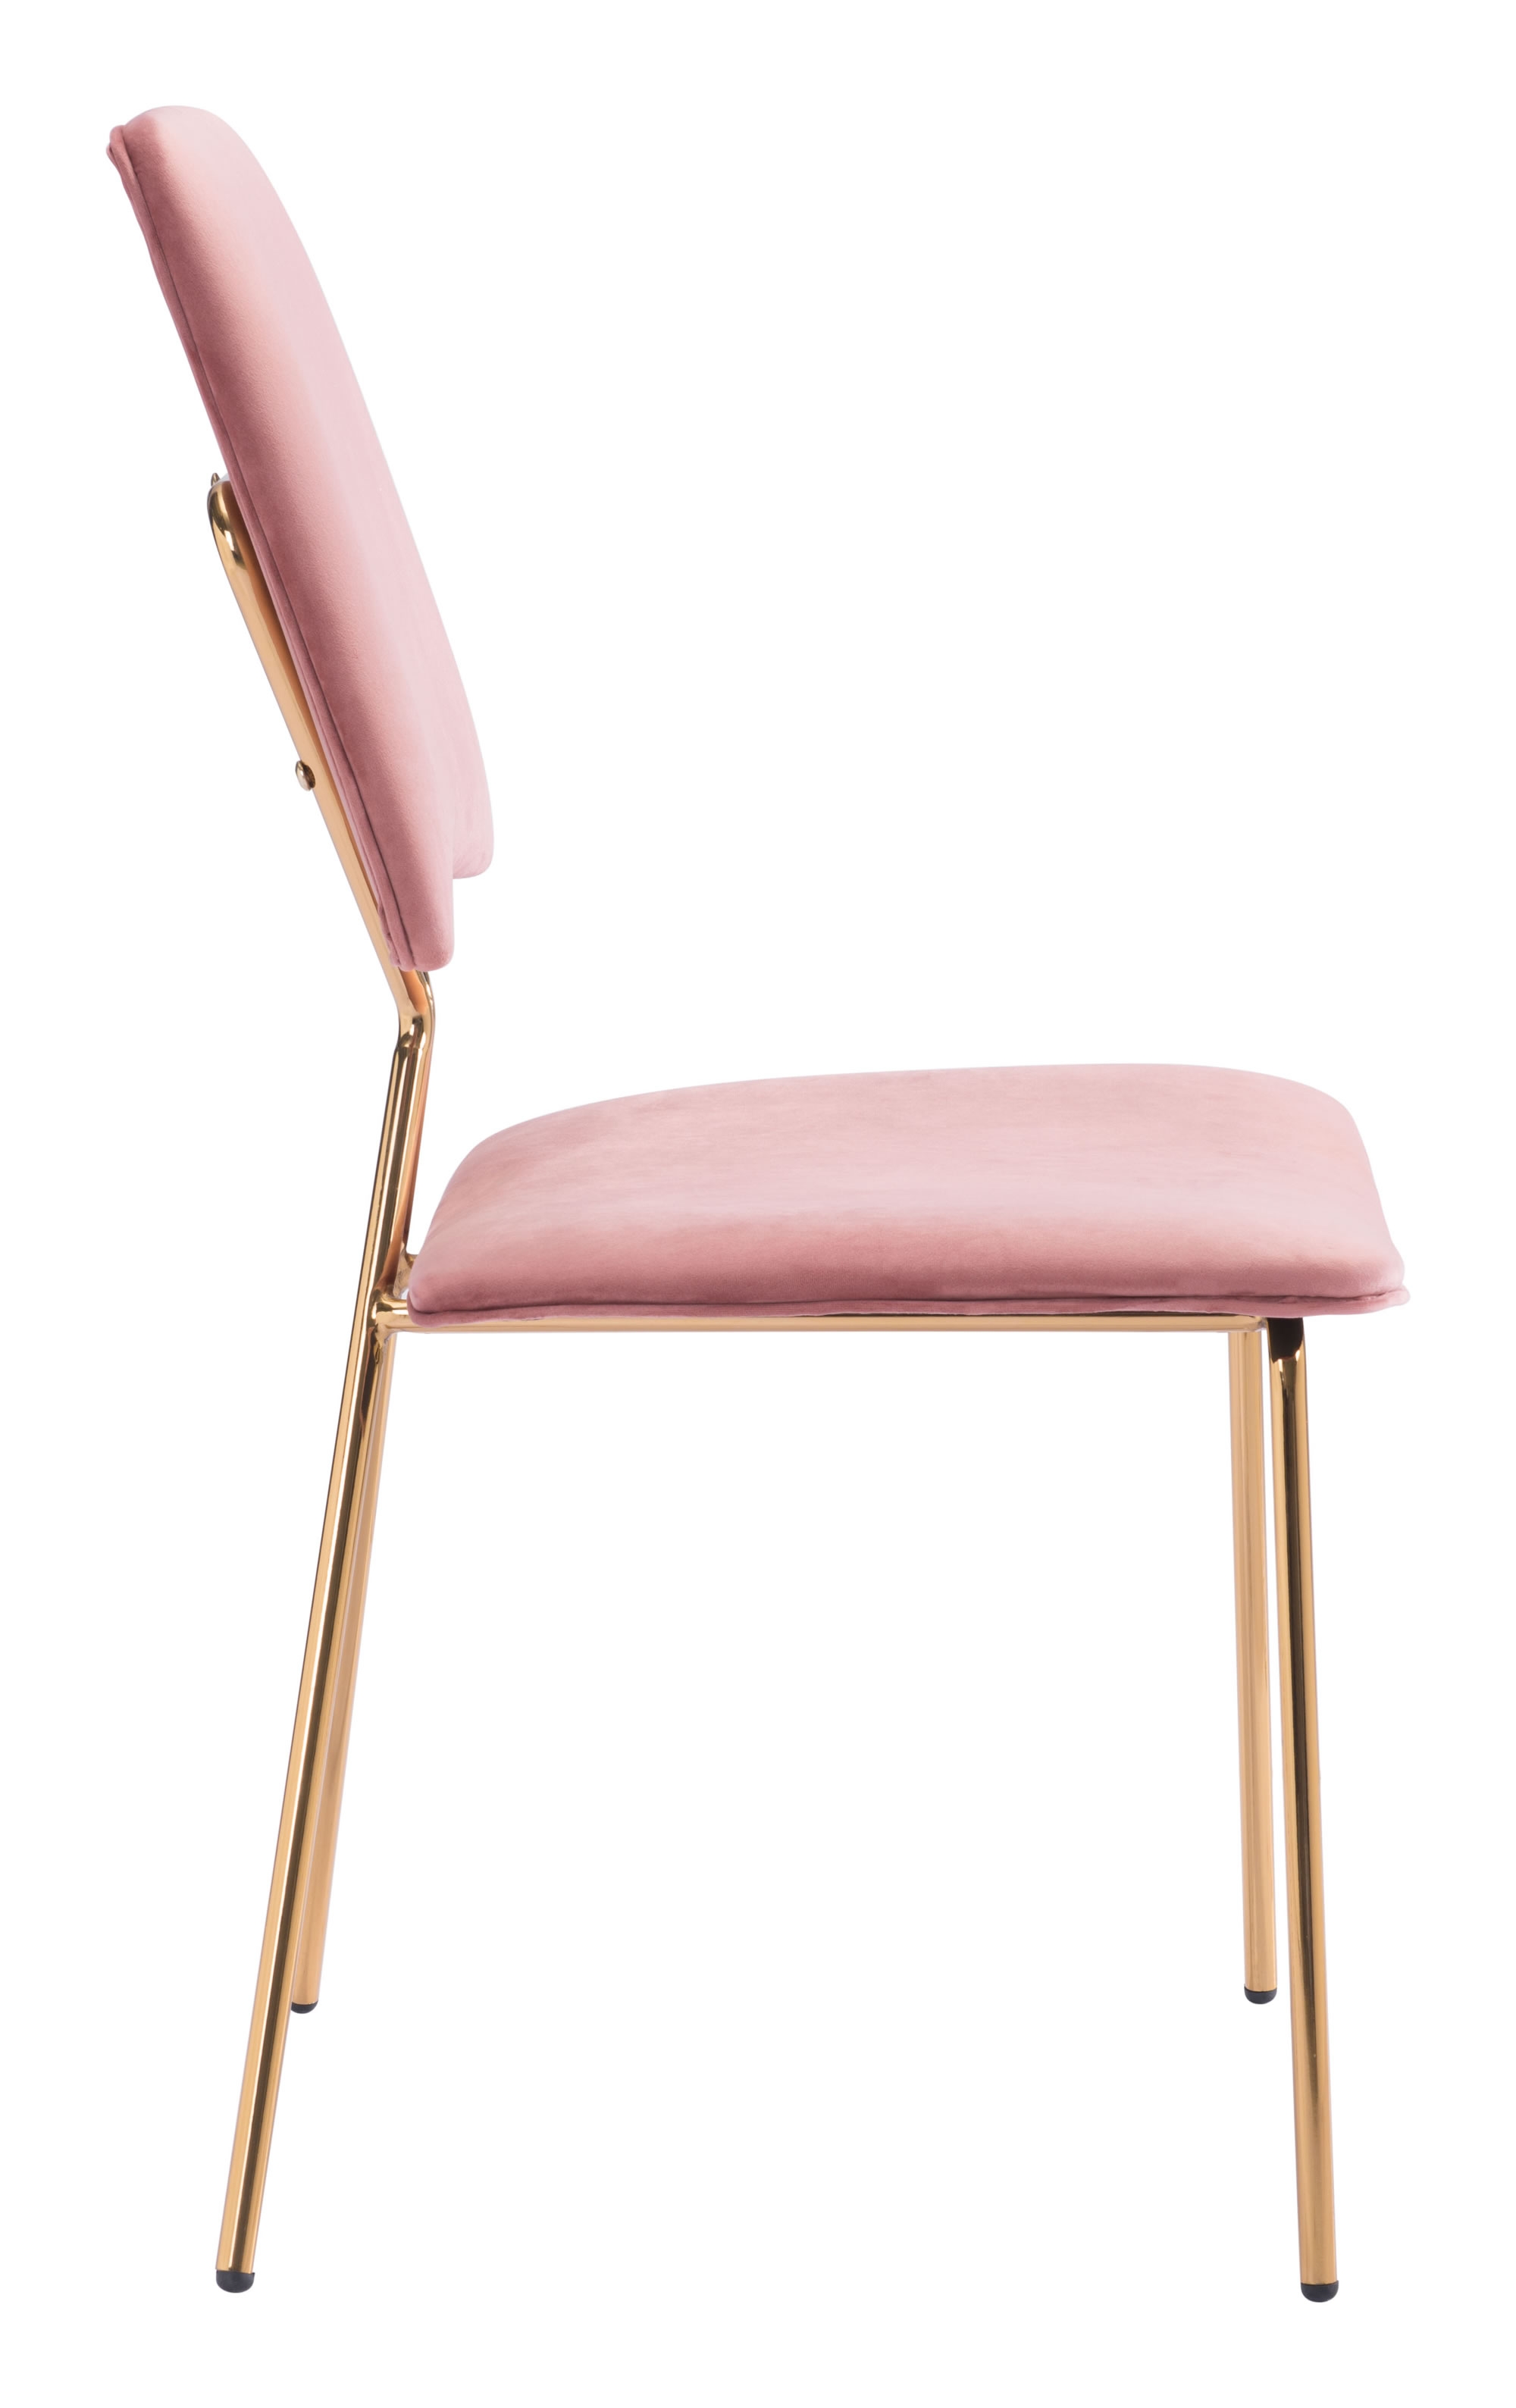 Chloe Dining Chair Pink & Gold (Set of 2) - Image 1